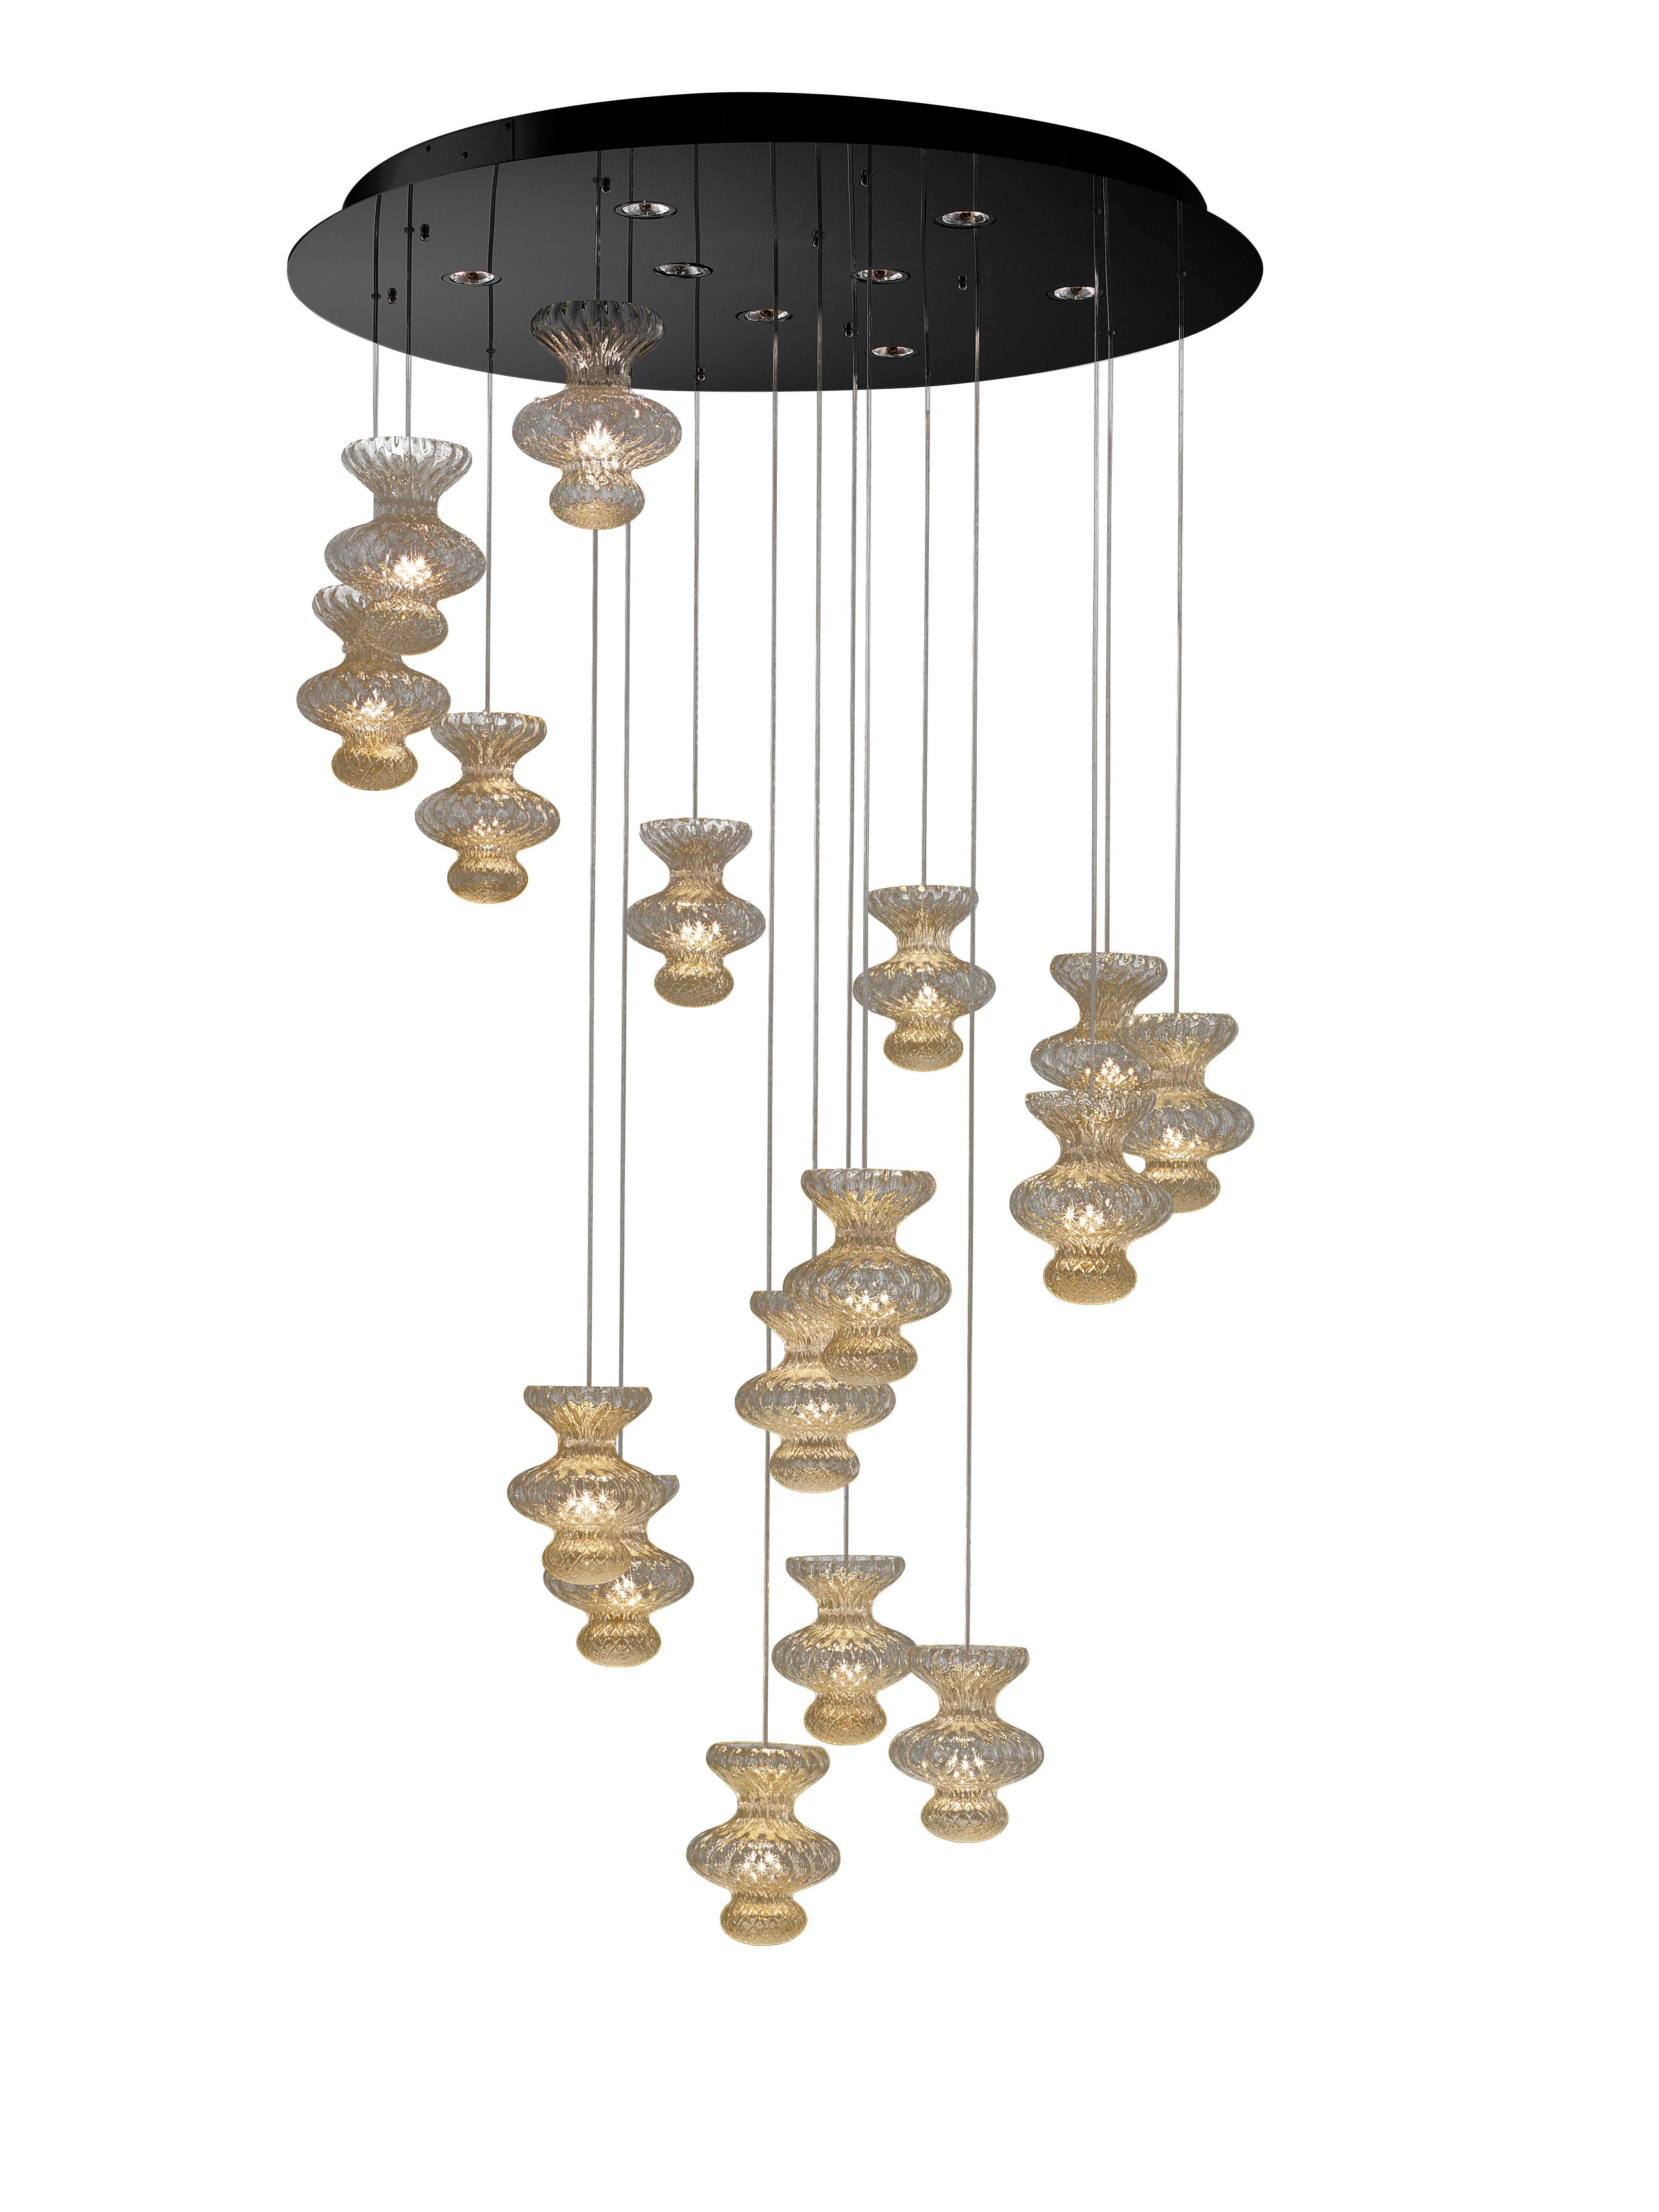 Gold (Gold_OO) Spinn 7219 Suspension Lamp in Glass and Polished Chrome, by Barovier&Toso